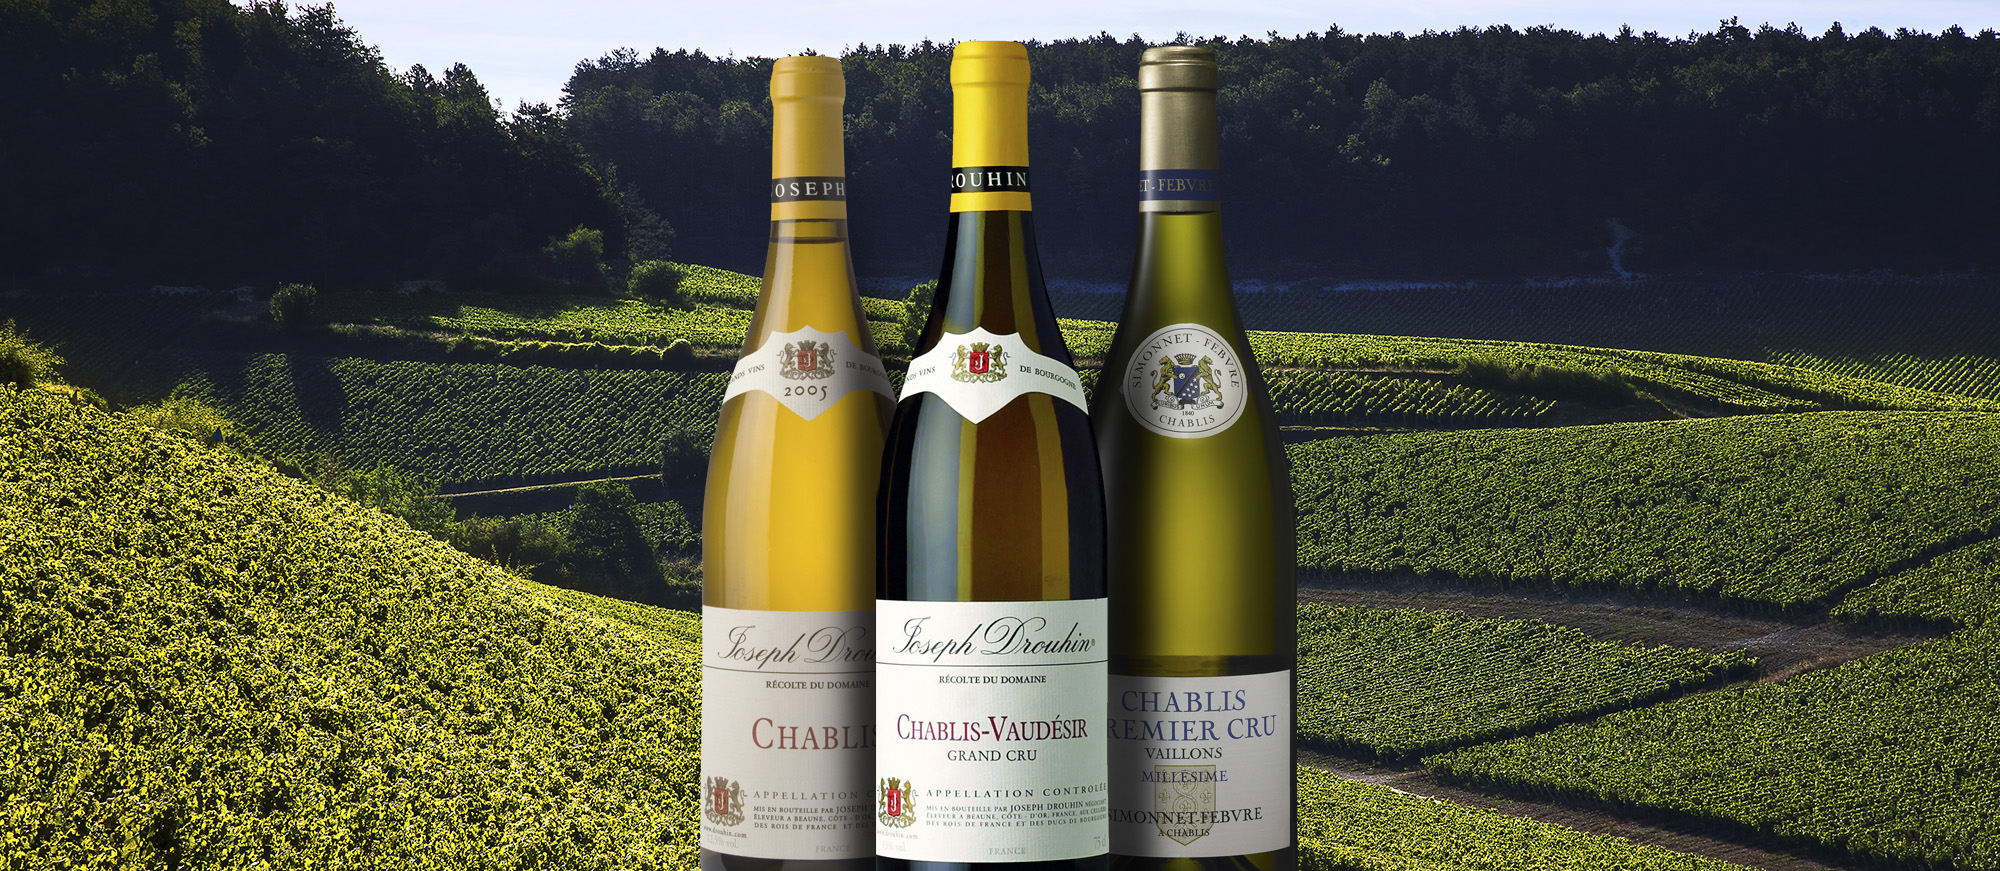 10 Most Popular French White Wines 